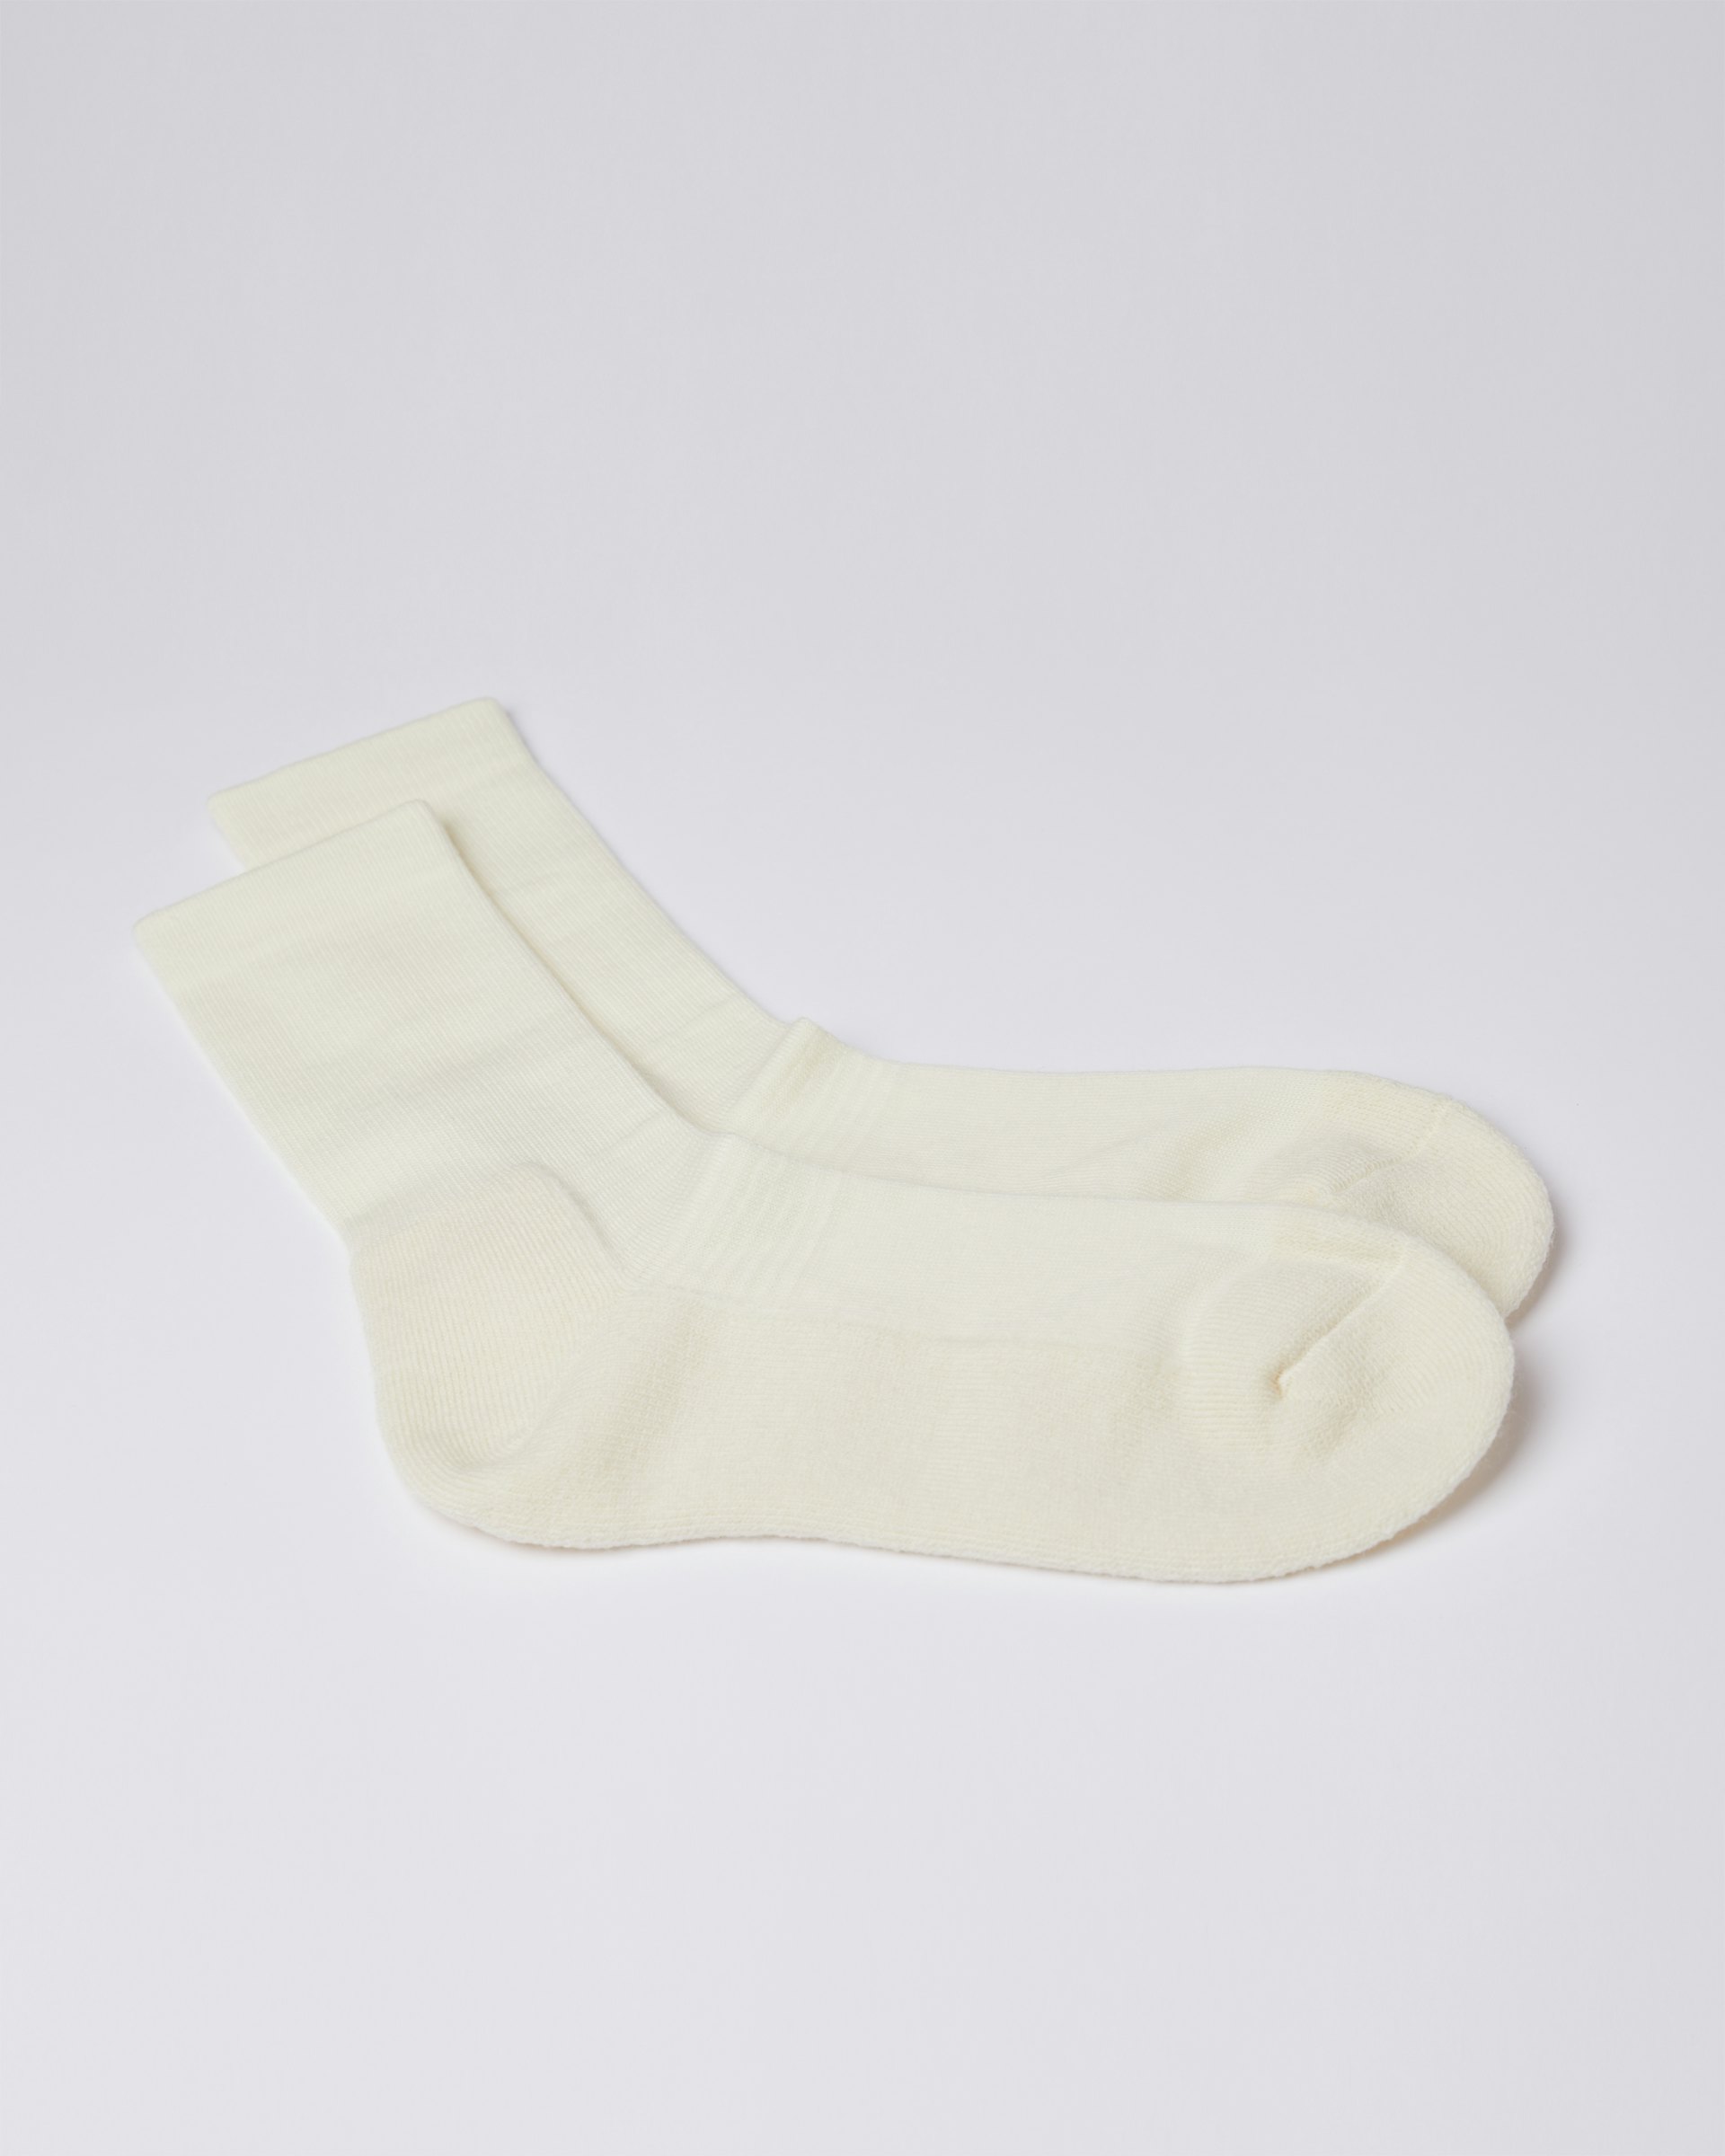 Wool sock belongs to the category Items and is in color off white (3 of 3)